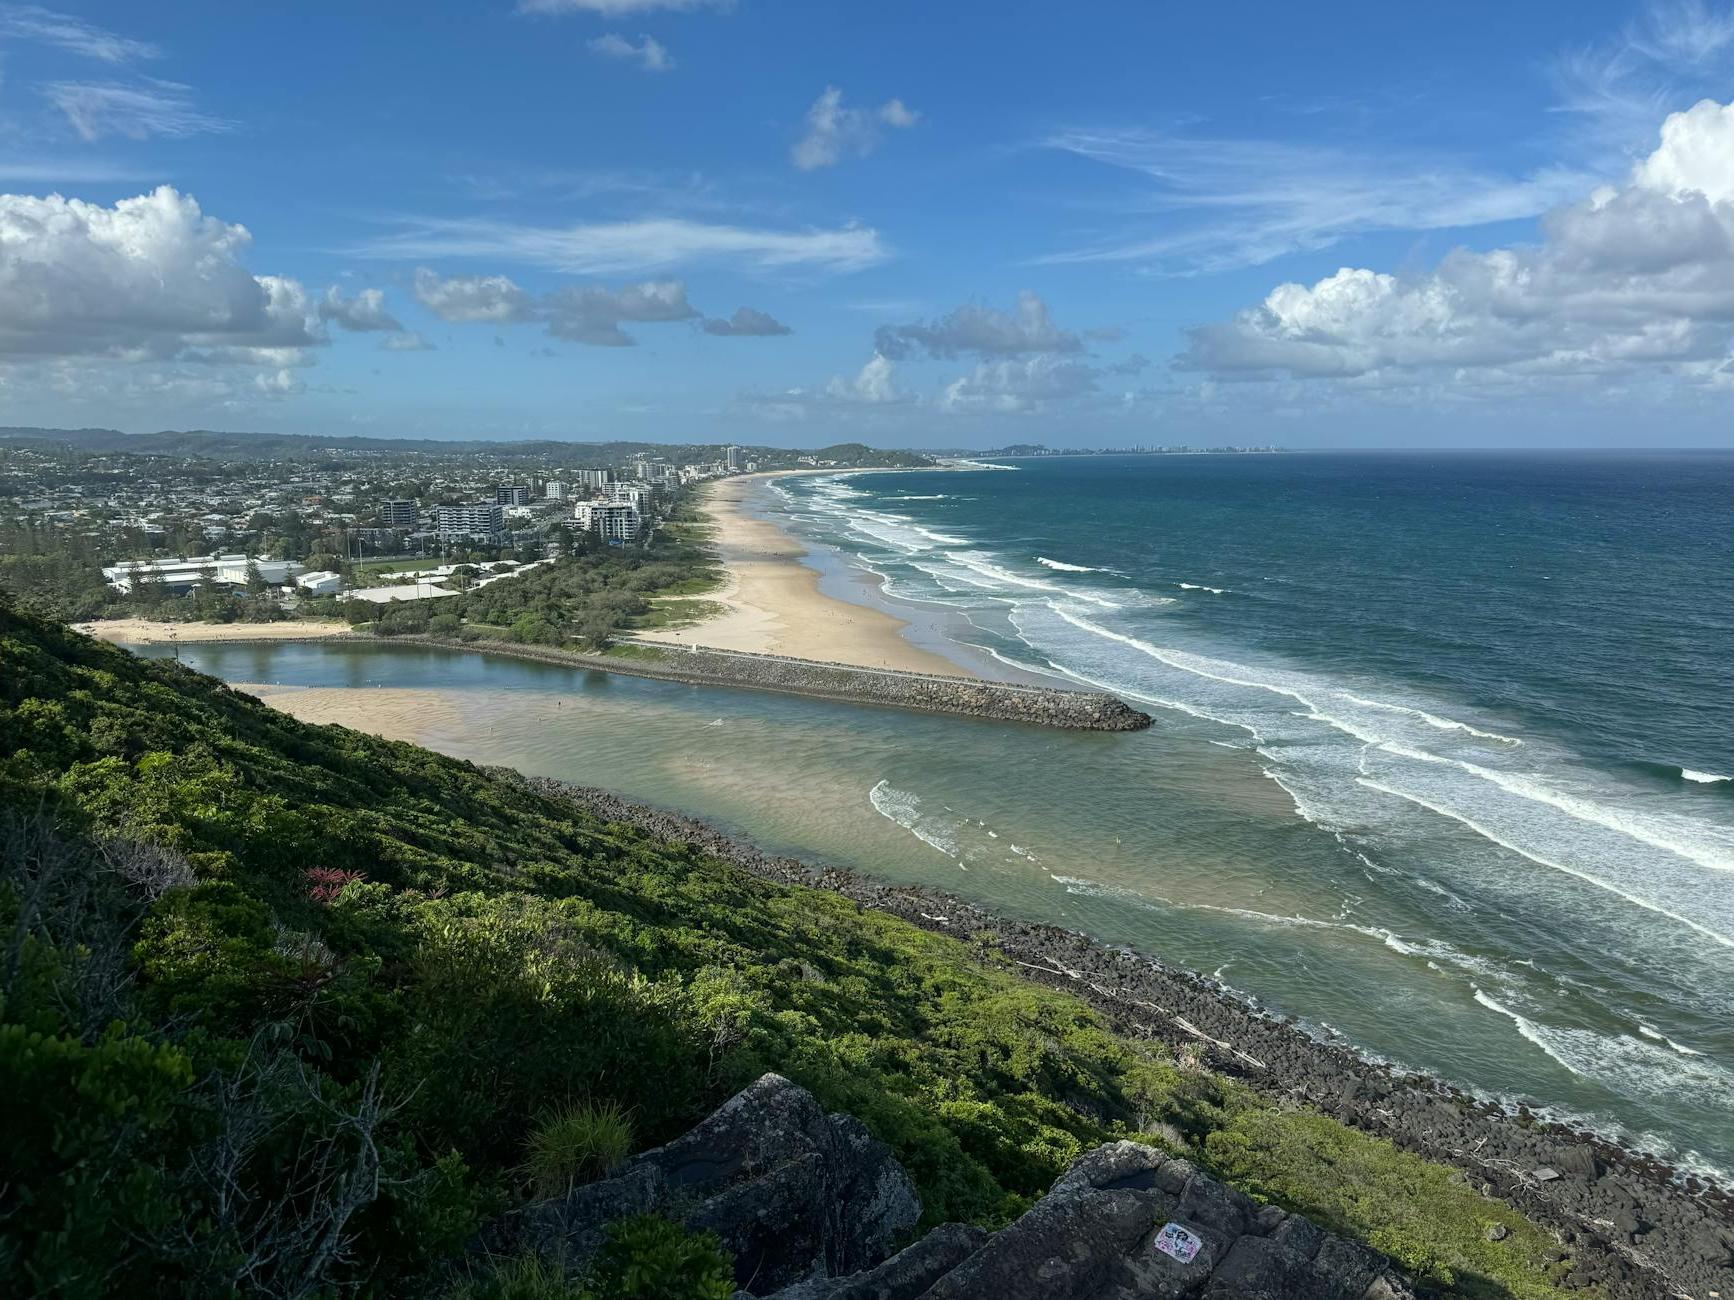 A view of the beach and ocean from a hill